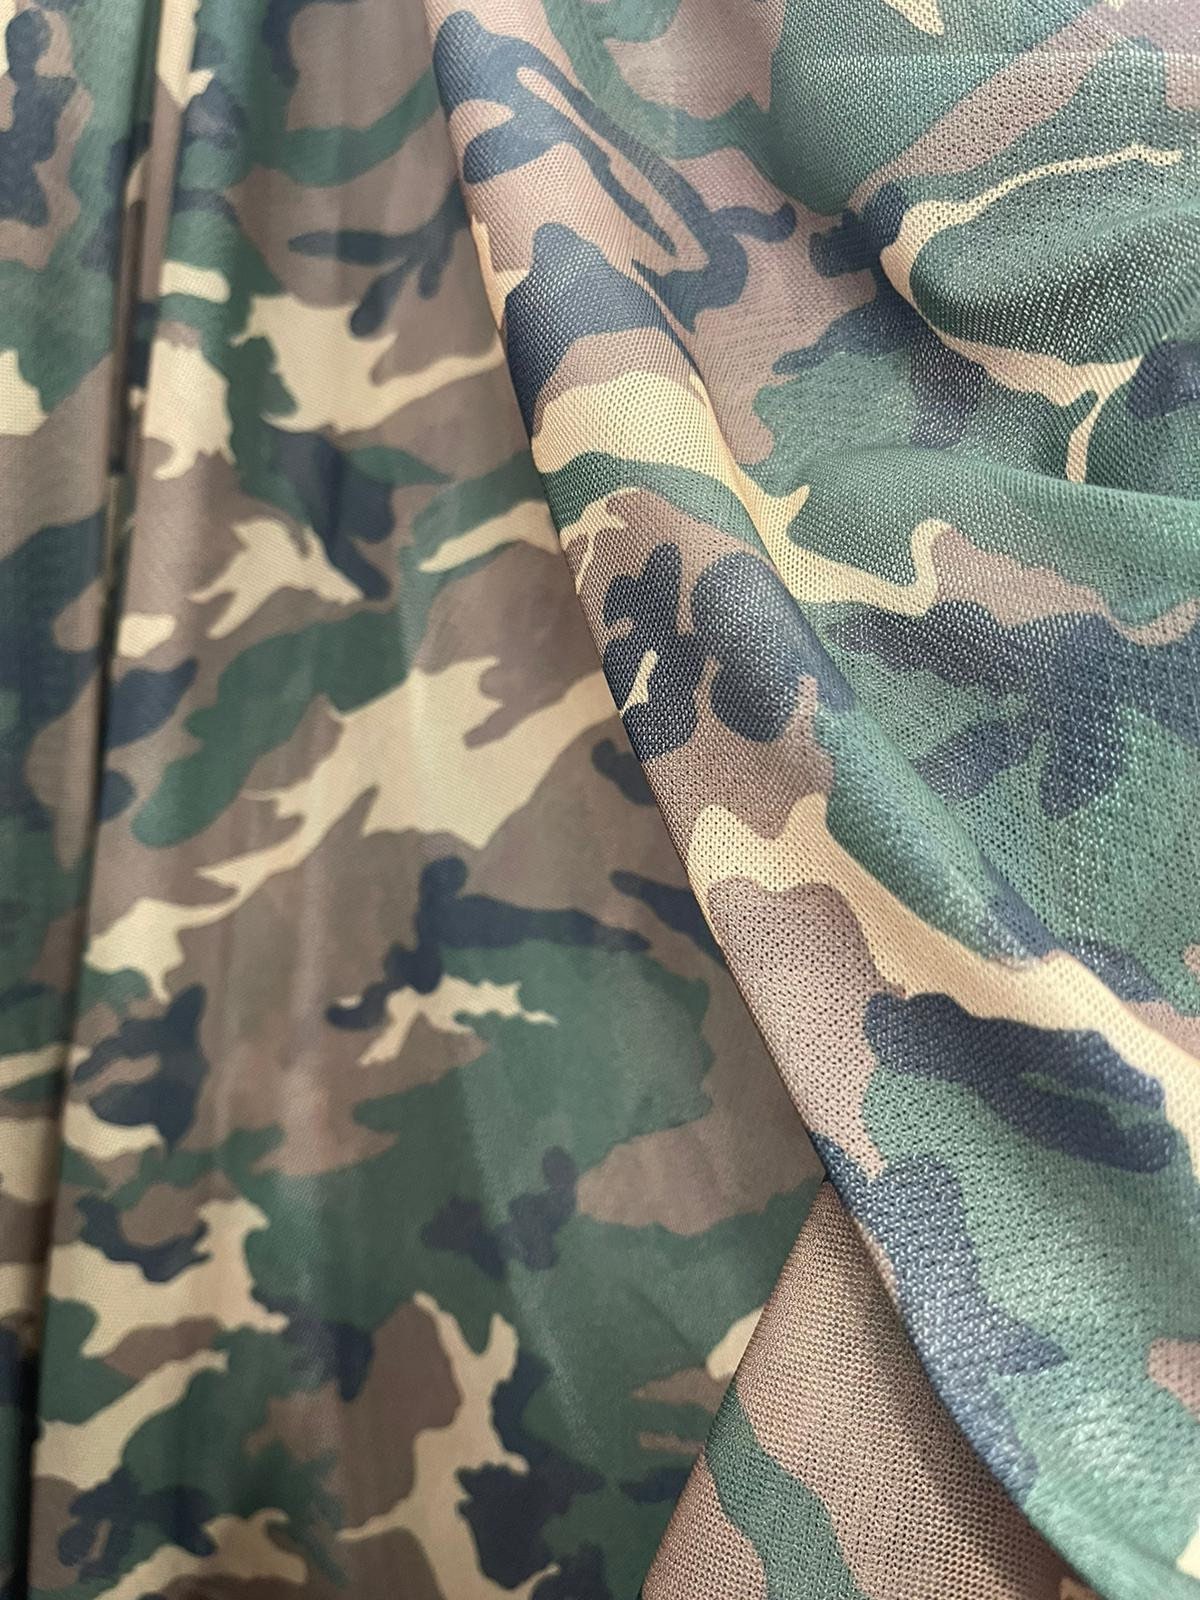 New Camouflage MESH Fabric Green Camo mesh fabric Sold by the | Etsy